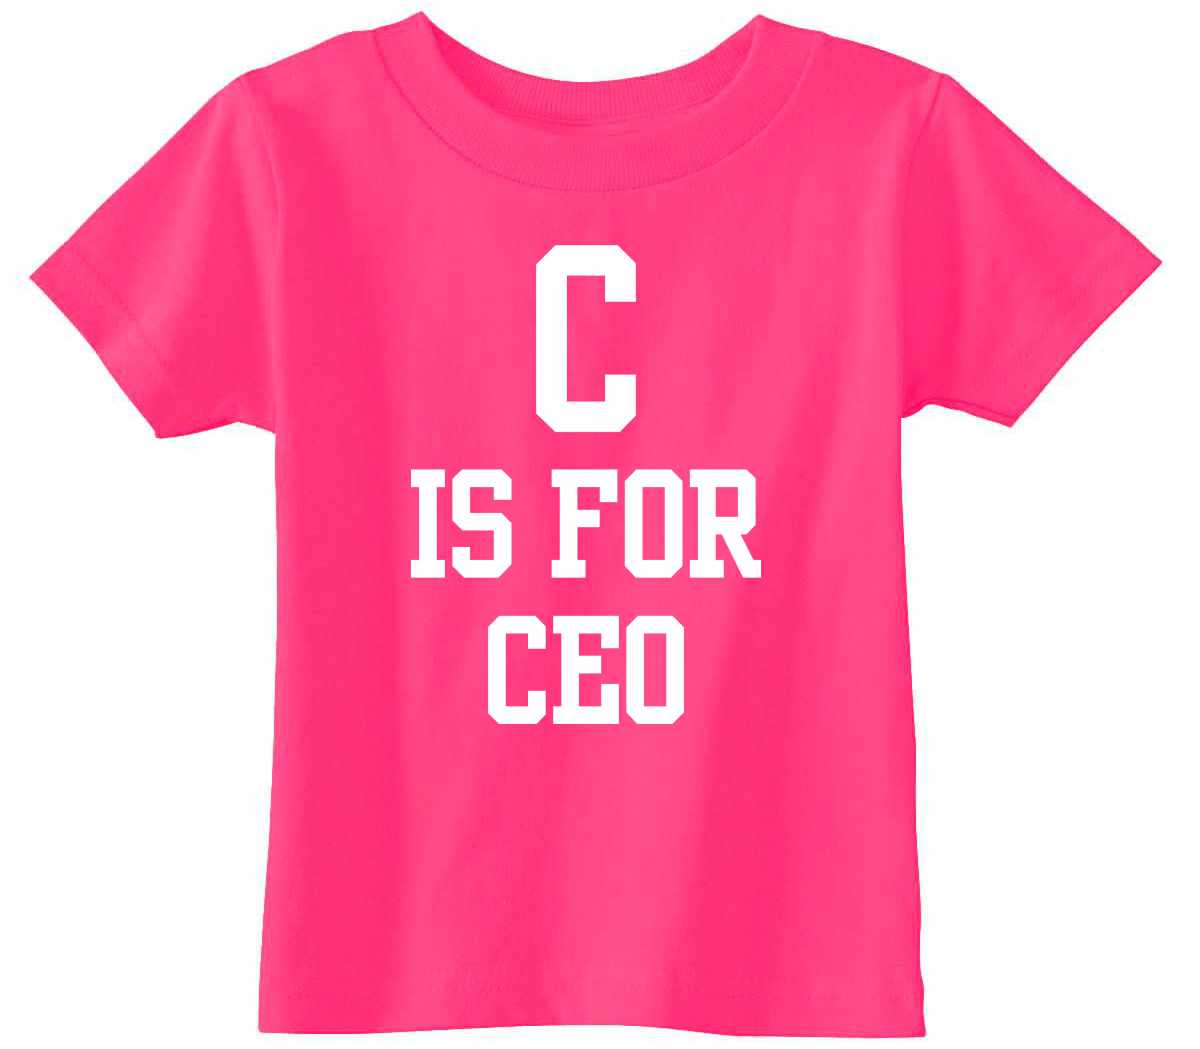 C is for CEO on Infant-Toddler T-Shirt (#1280-7)